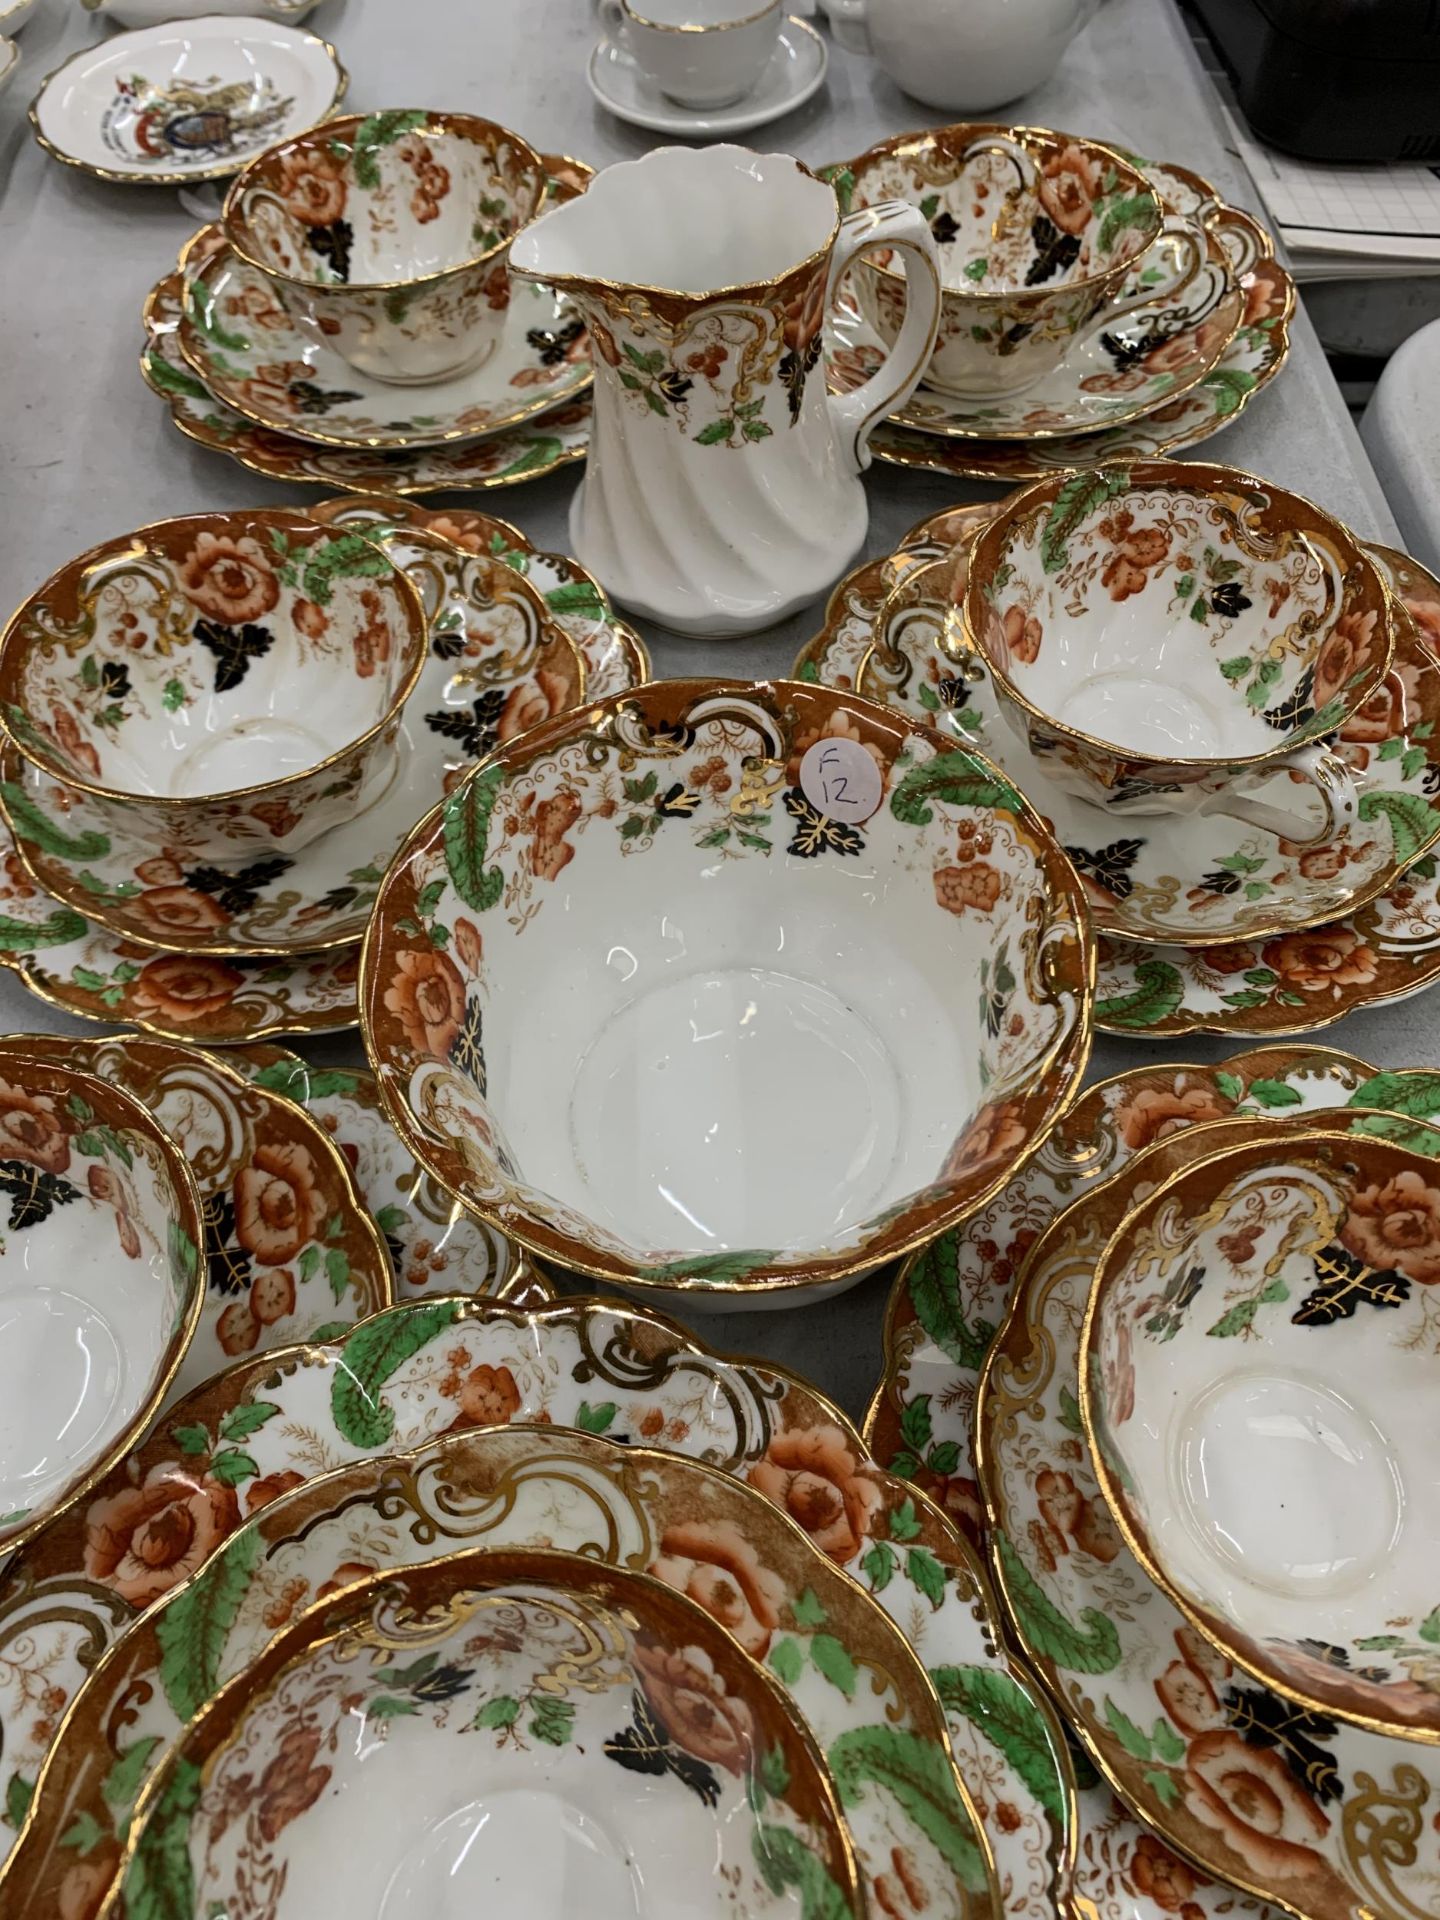 A LARGE QUANTITY OF ROYAL WINDSOR CHINA CUPS, SAUCERS AND SIDE PLATES PLUS A CREAM JUG AND SUGAR - Image 2 of 5